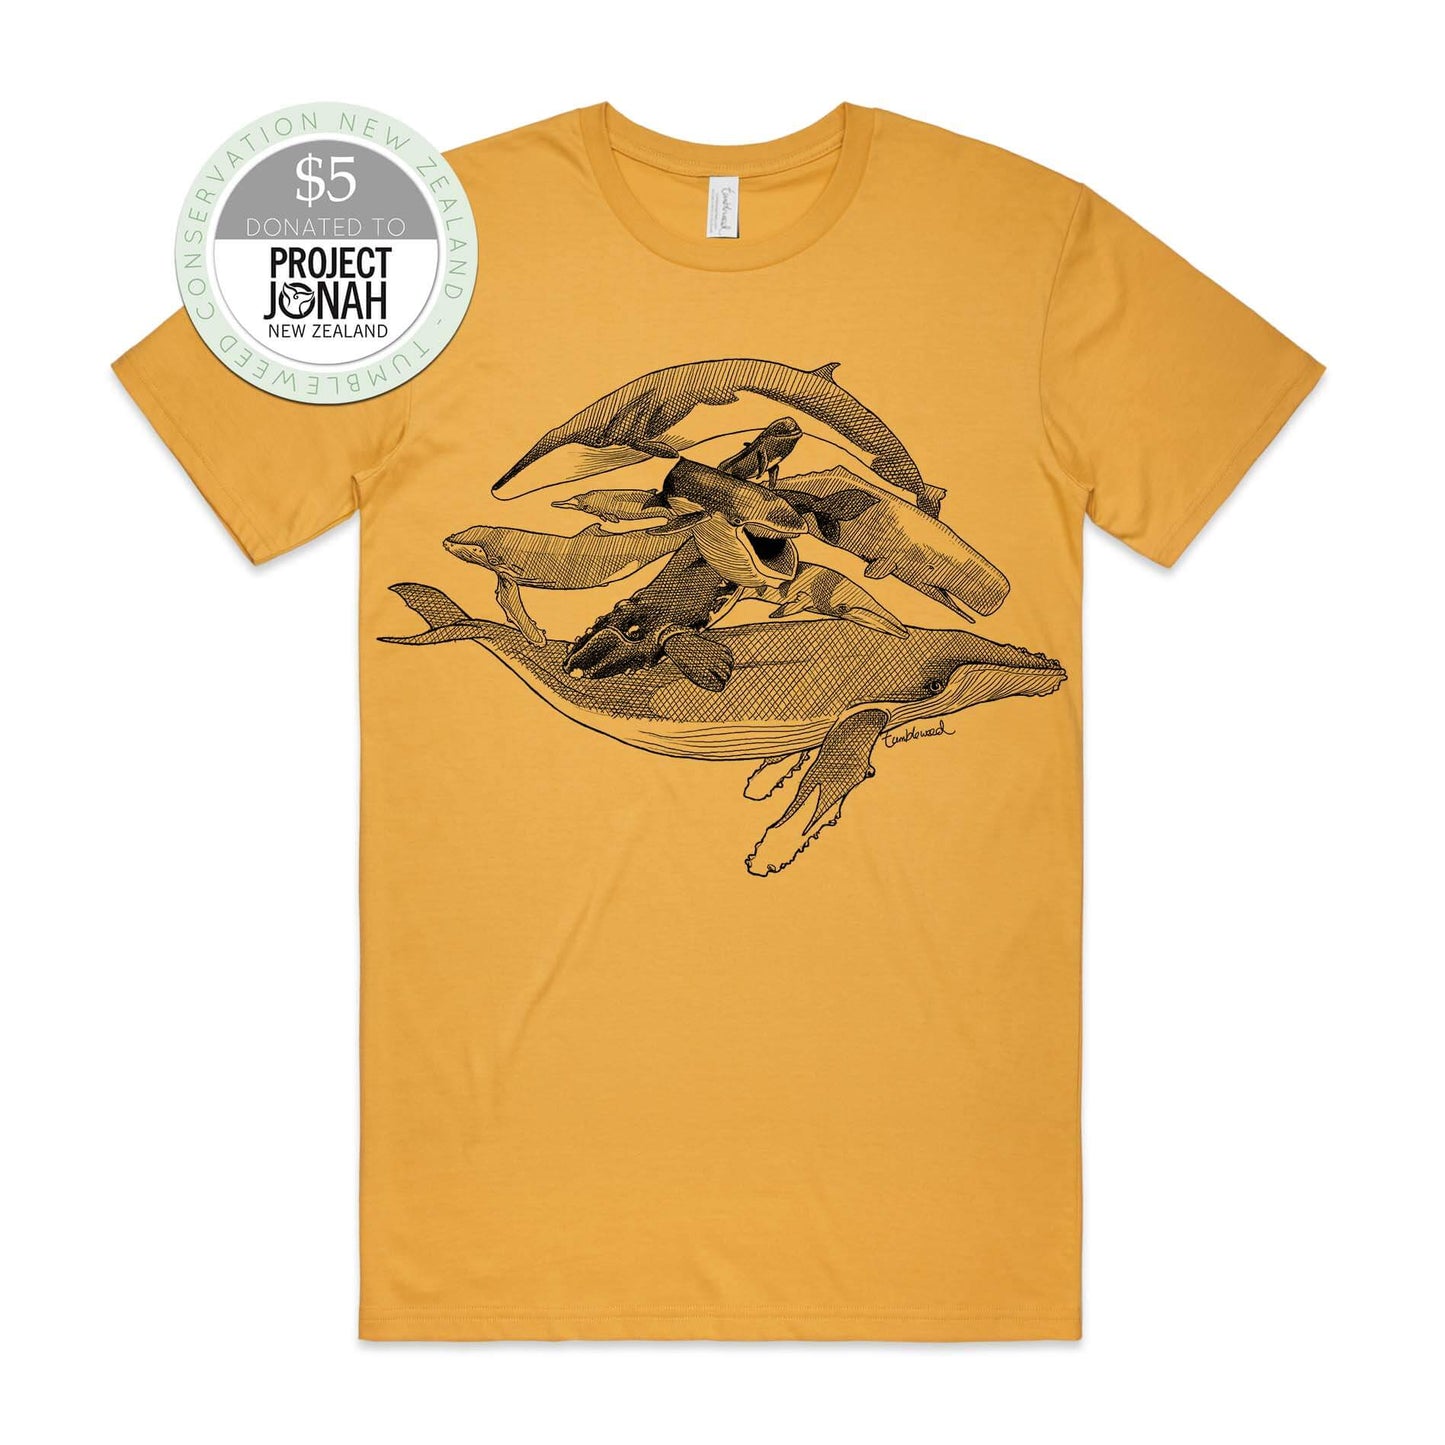 Mustard, male t-shirt featuring a screen printed Whales design.